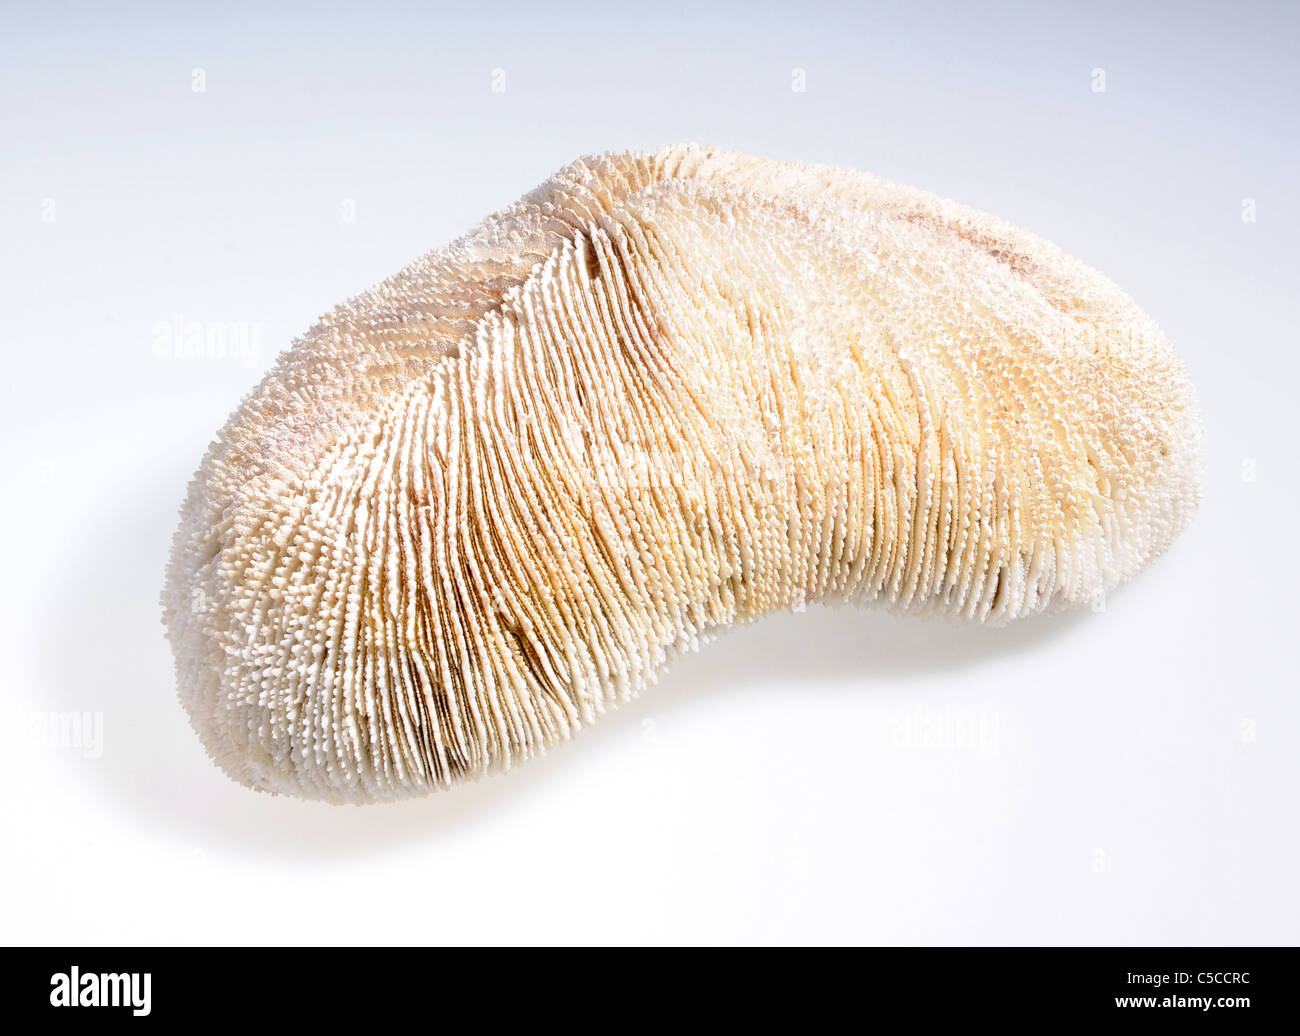 illegal endangered species product from CITES list - Mushroom Coral (Fungia) Stock Photo